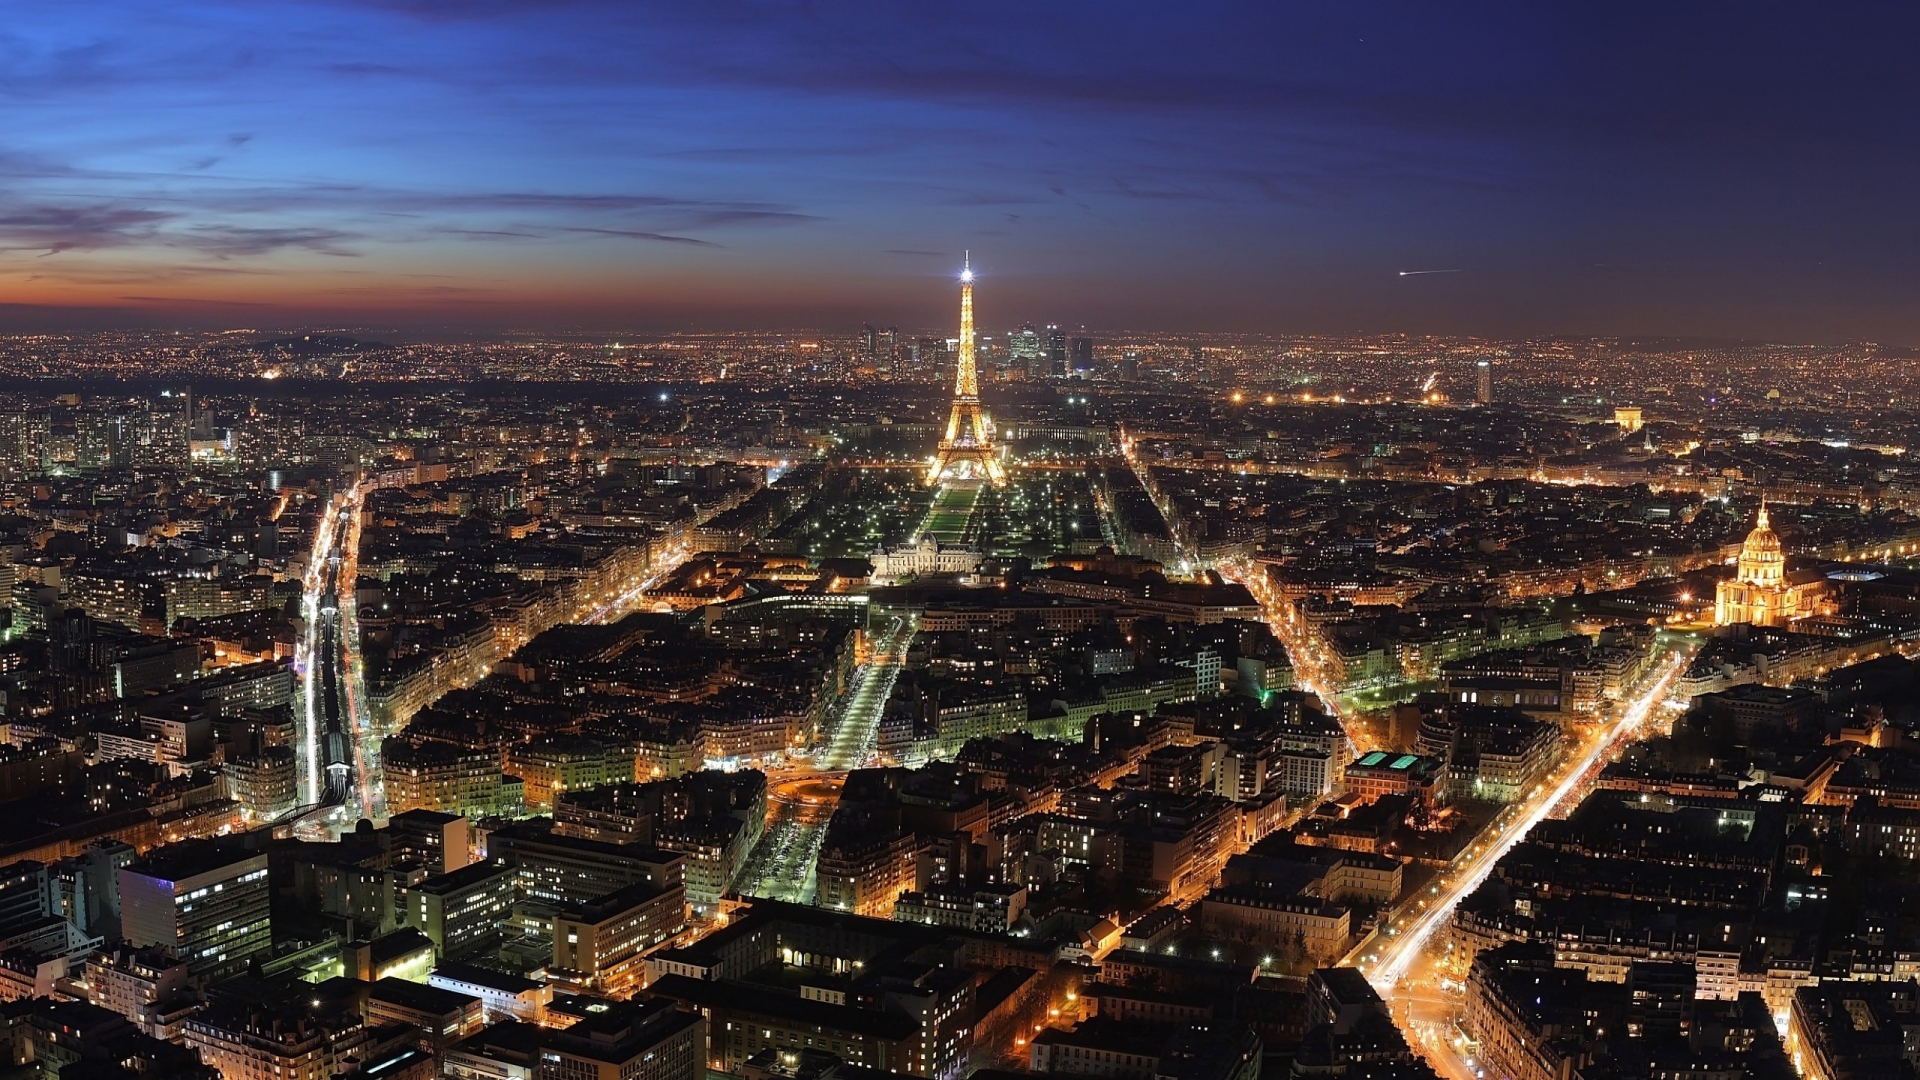 Paris seen at night for 1920 x 1080 HDTV 1080p resolution